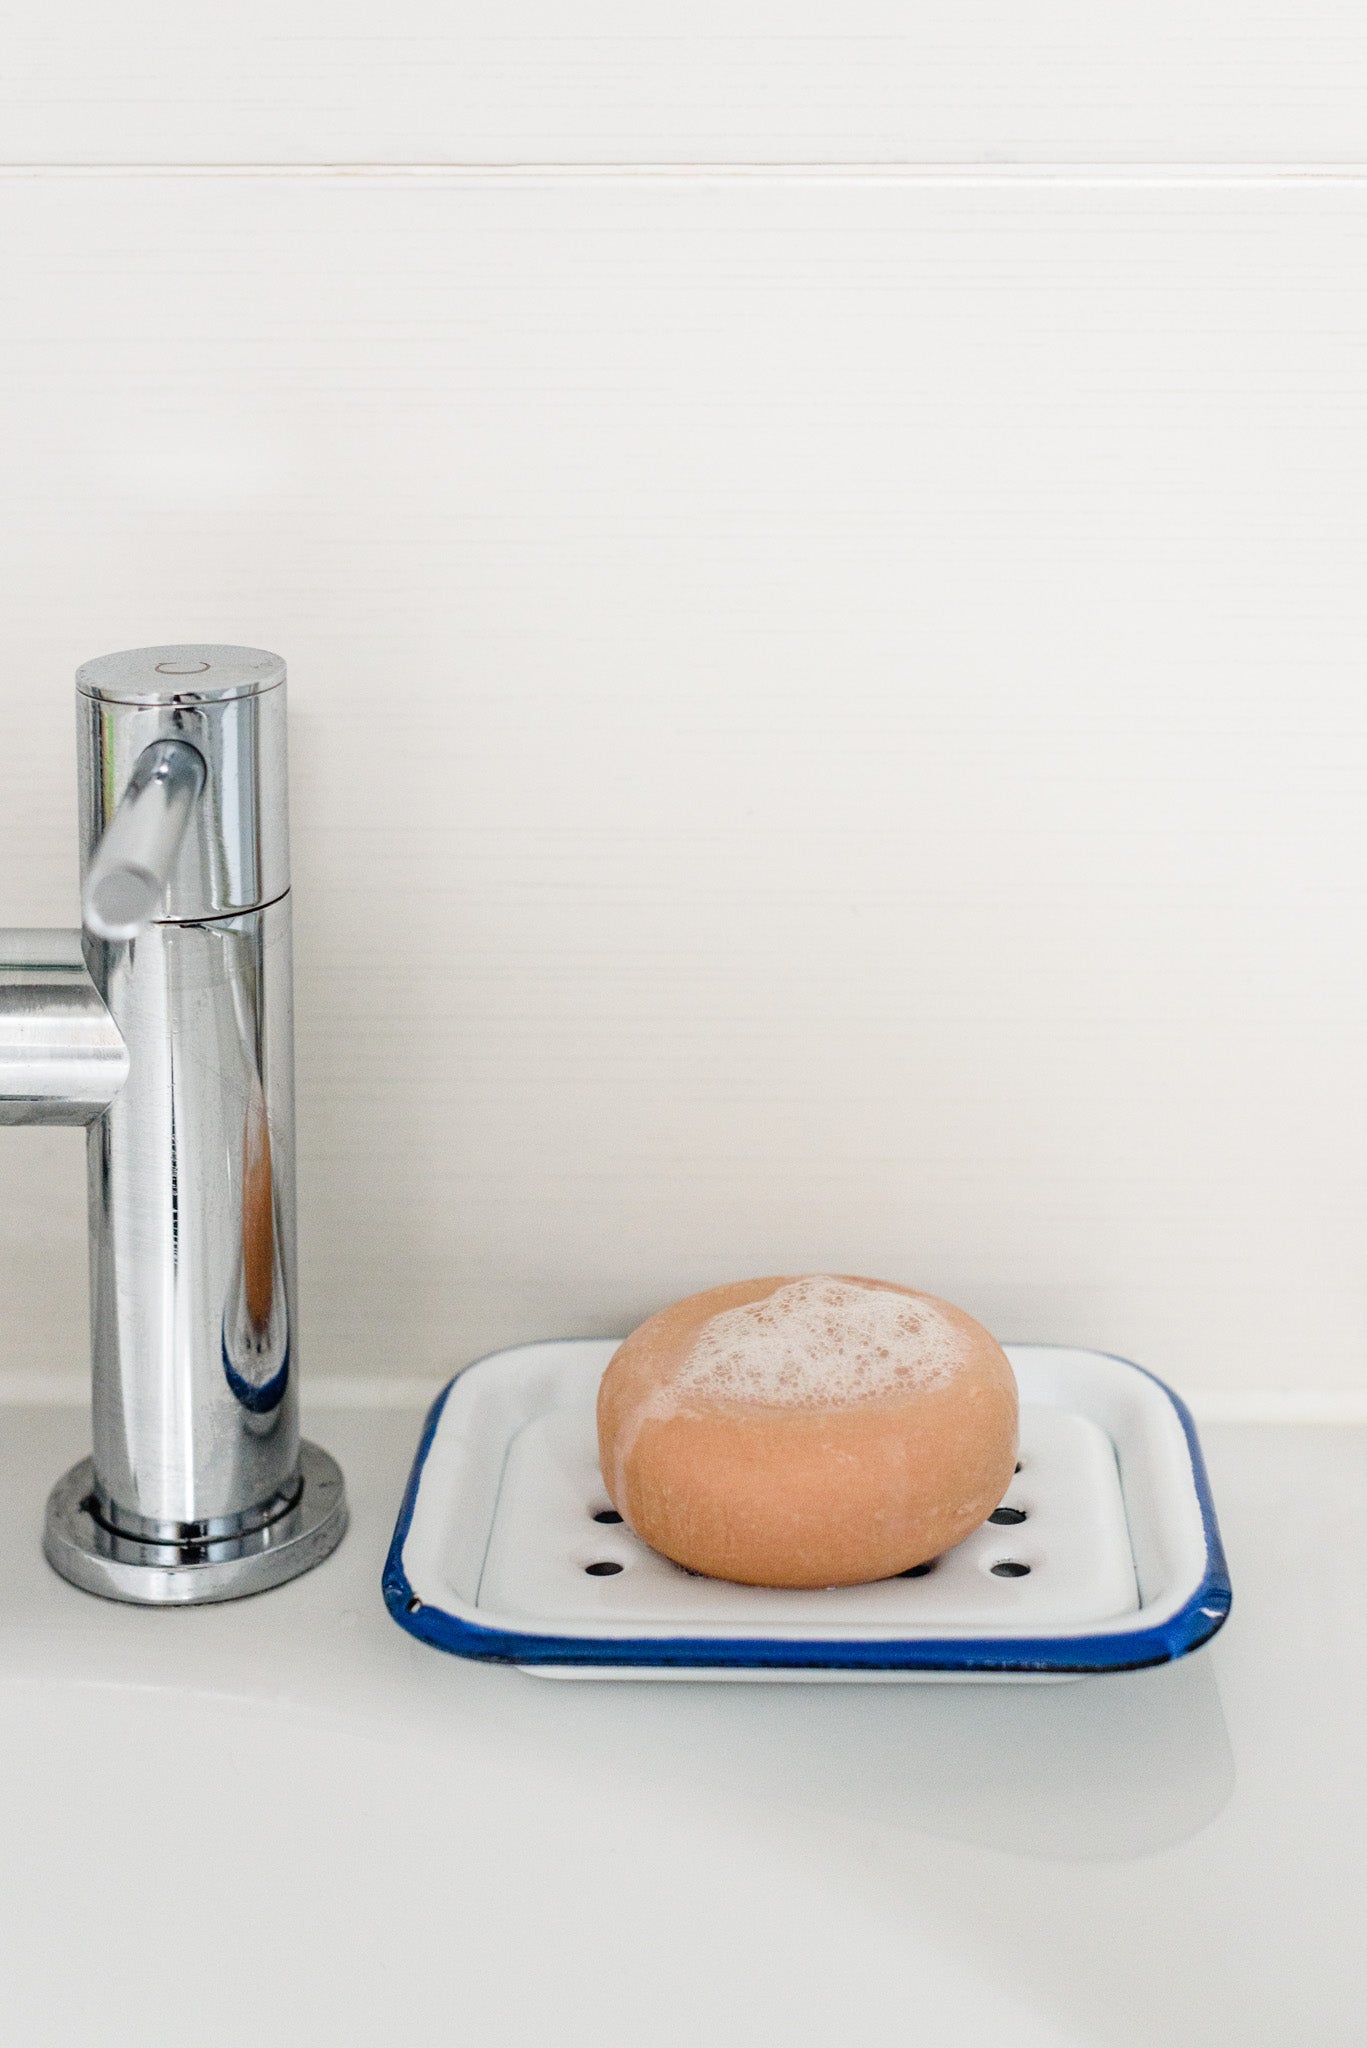 The round pink shampoo bar, foamy and bubbly, placed on an enamel tray, resting on a white sink next to a silver tap.